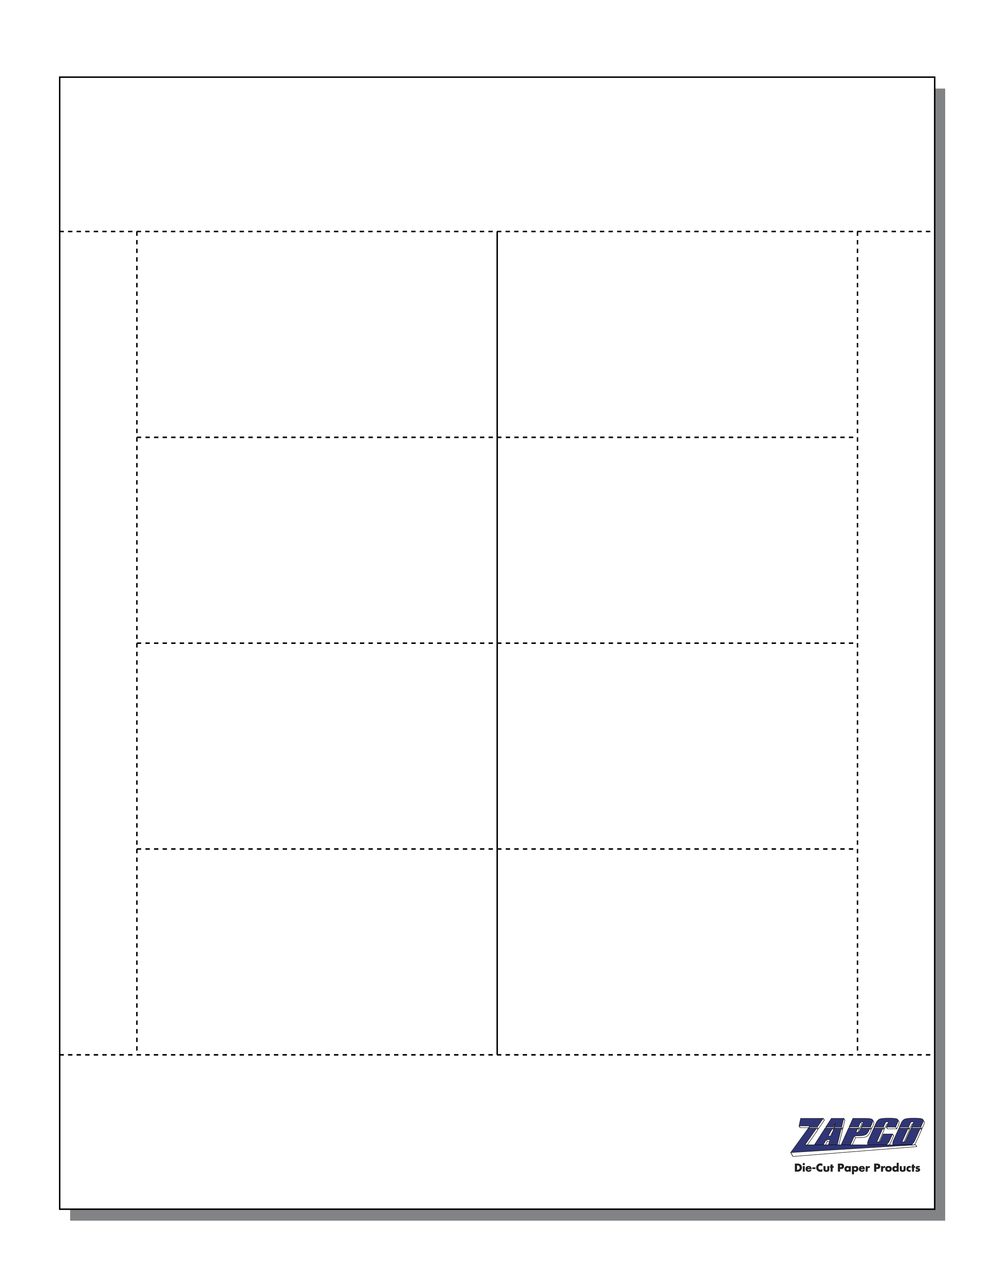 Item 596: 4-Up 3 1/2" x 2" Fold-over Business Card Paper 8 1/2" x 11" Sheet (250 Sheets)